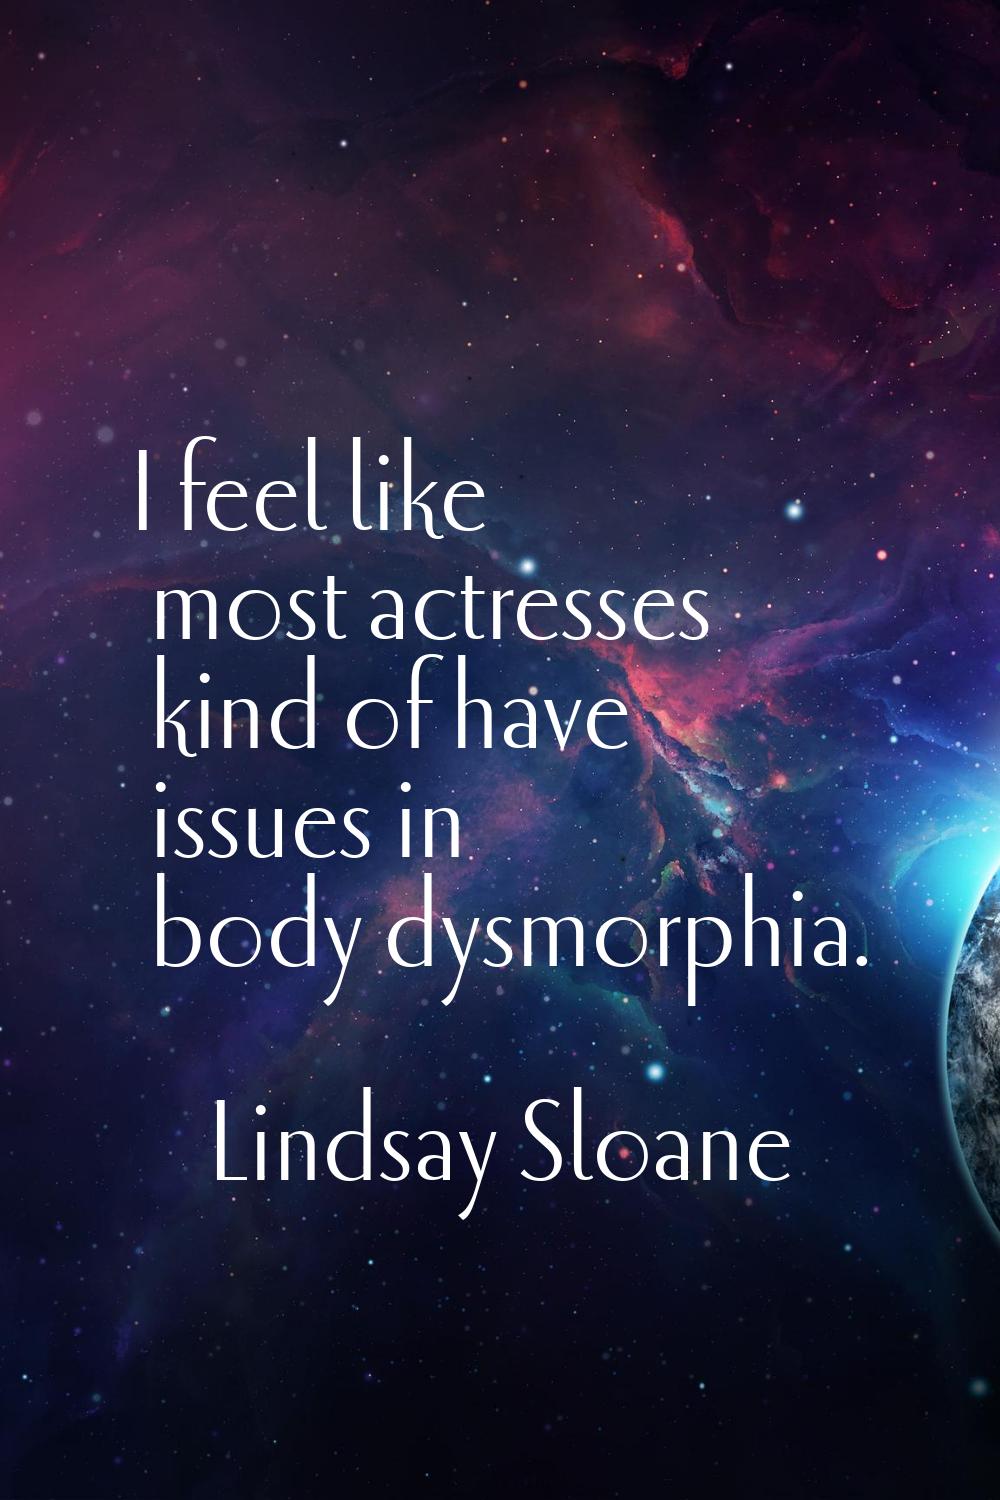 I feel like most actresses kind of have issues in body dysmorphia.